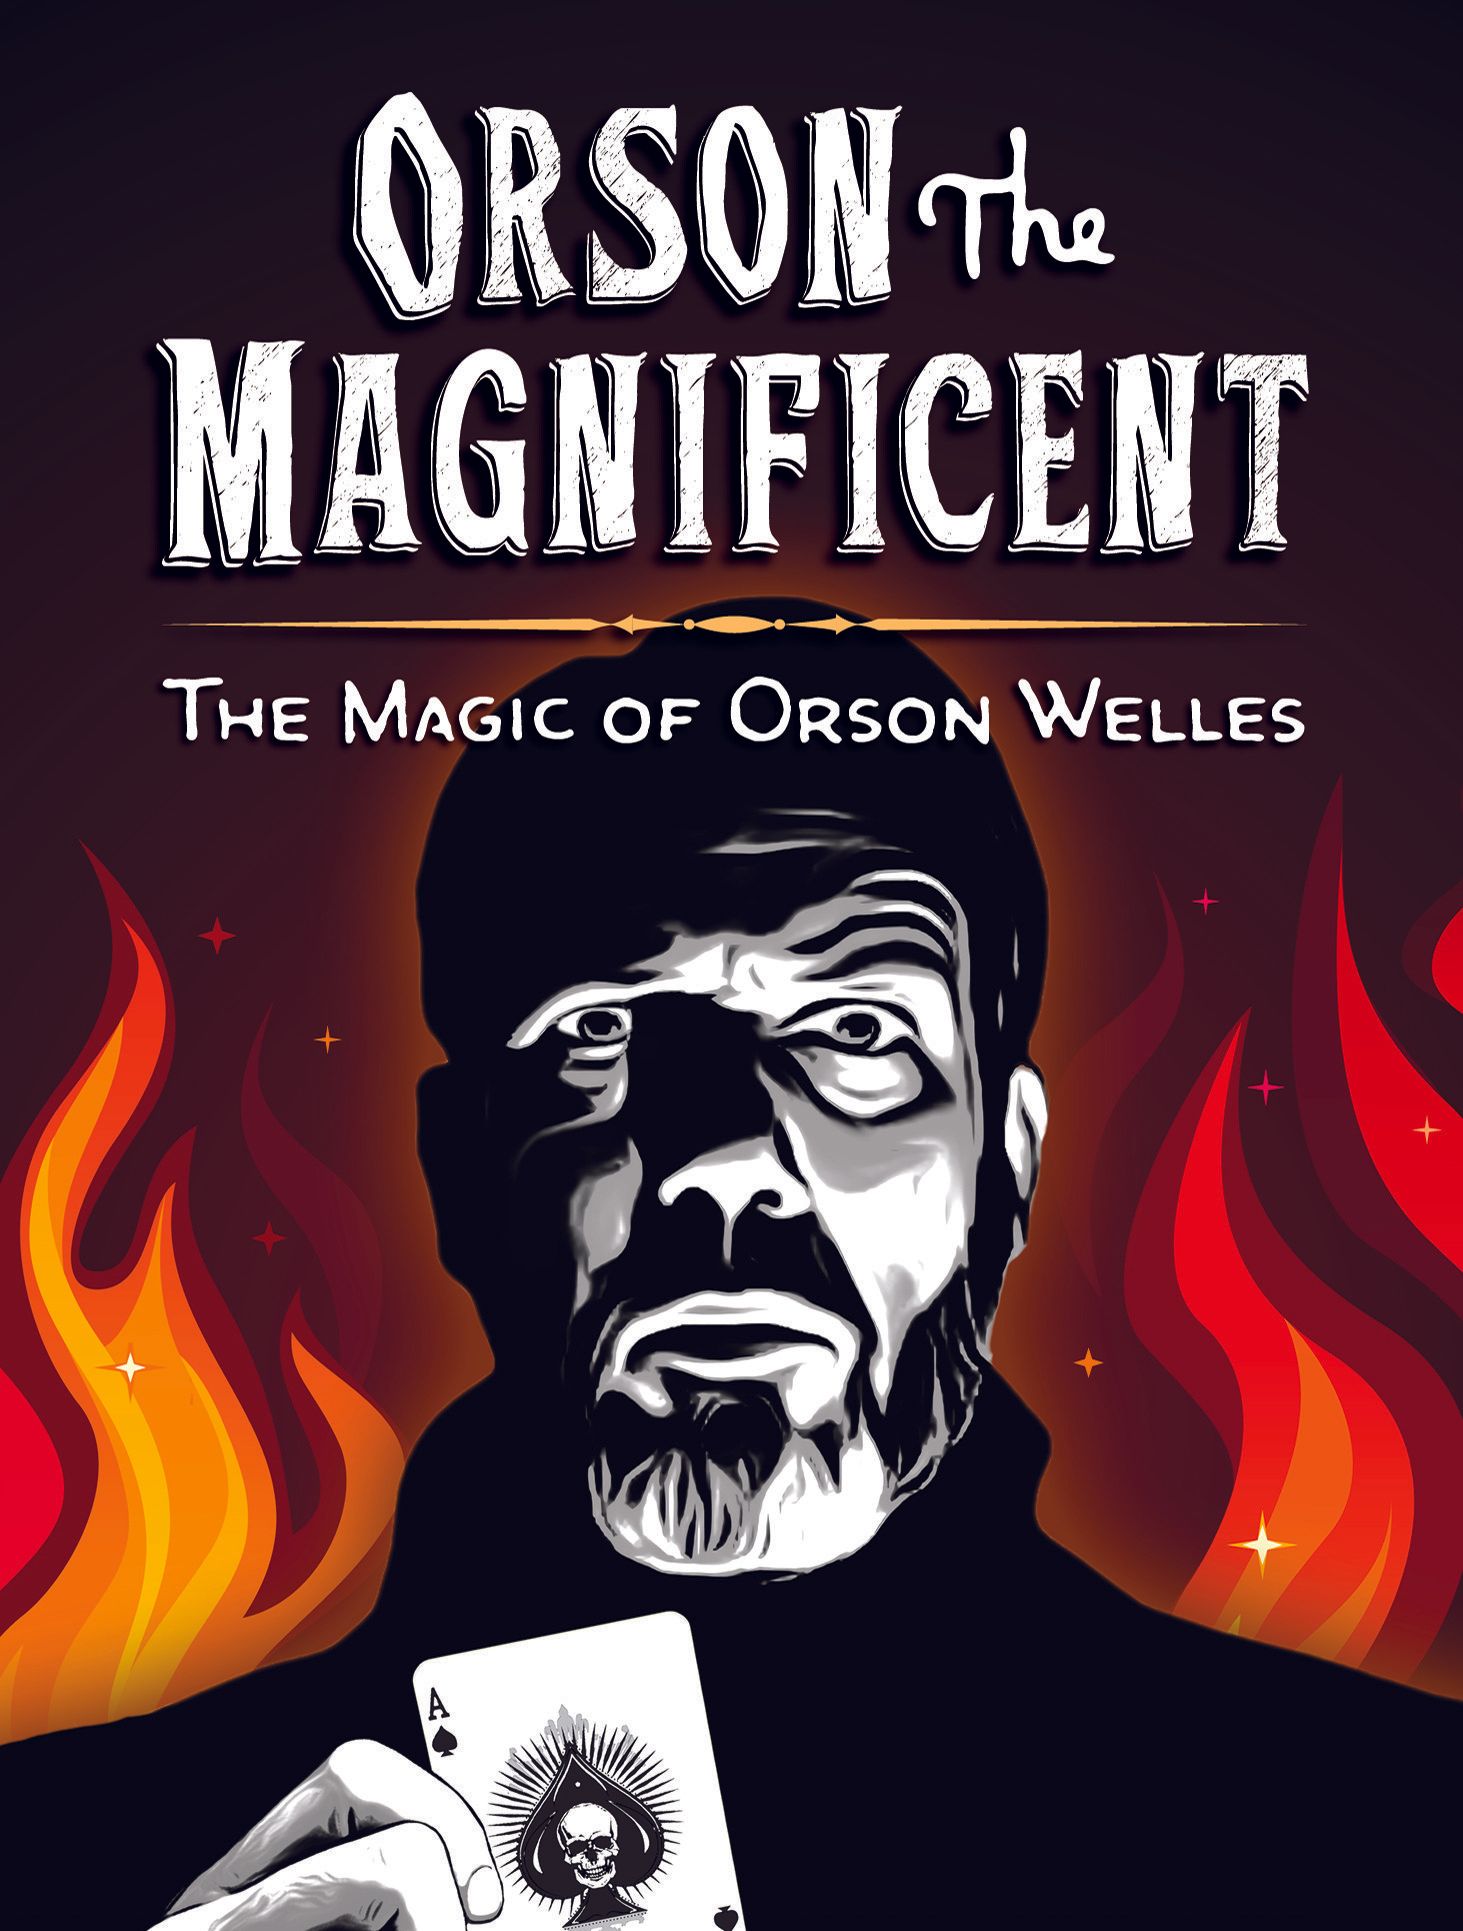 Orson the Magnificent: The Magic of Orson Welles